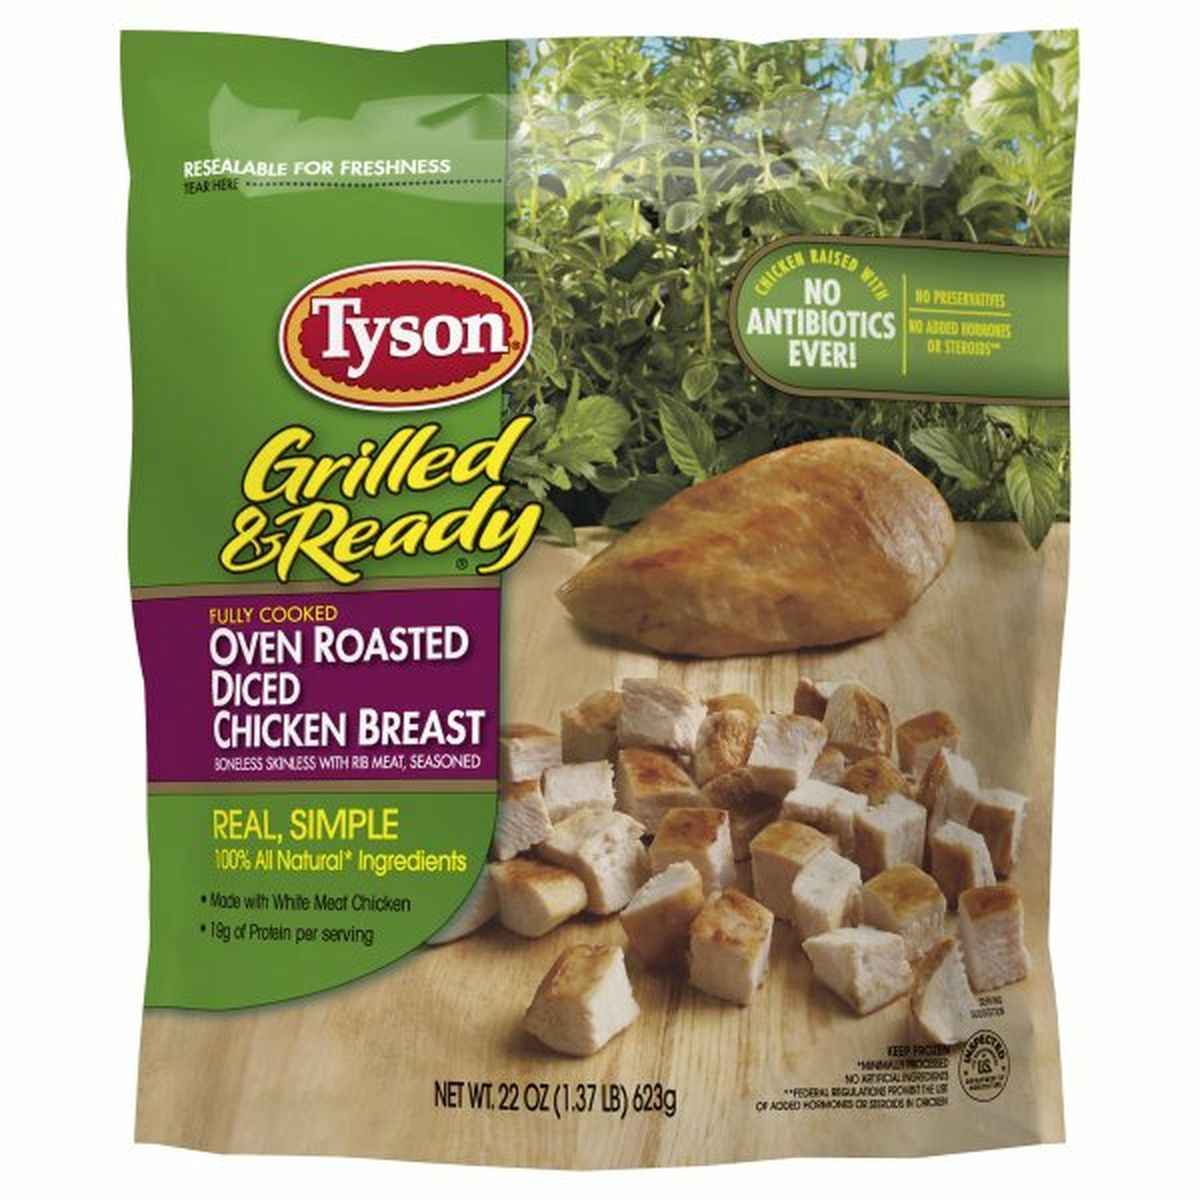 Calories in Tyson Grilled And Ready Grilled & Ready Grilled & Ready Fully Cooked Oven Roasted Diced Chicken Breast (Frozen)